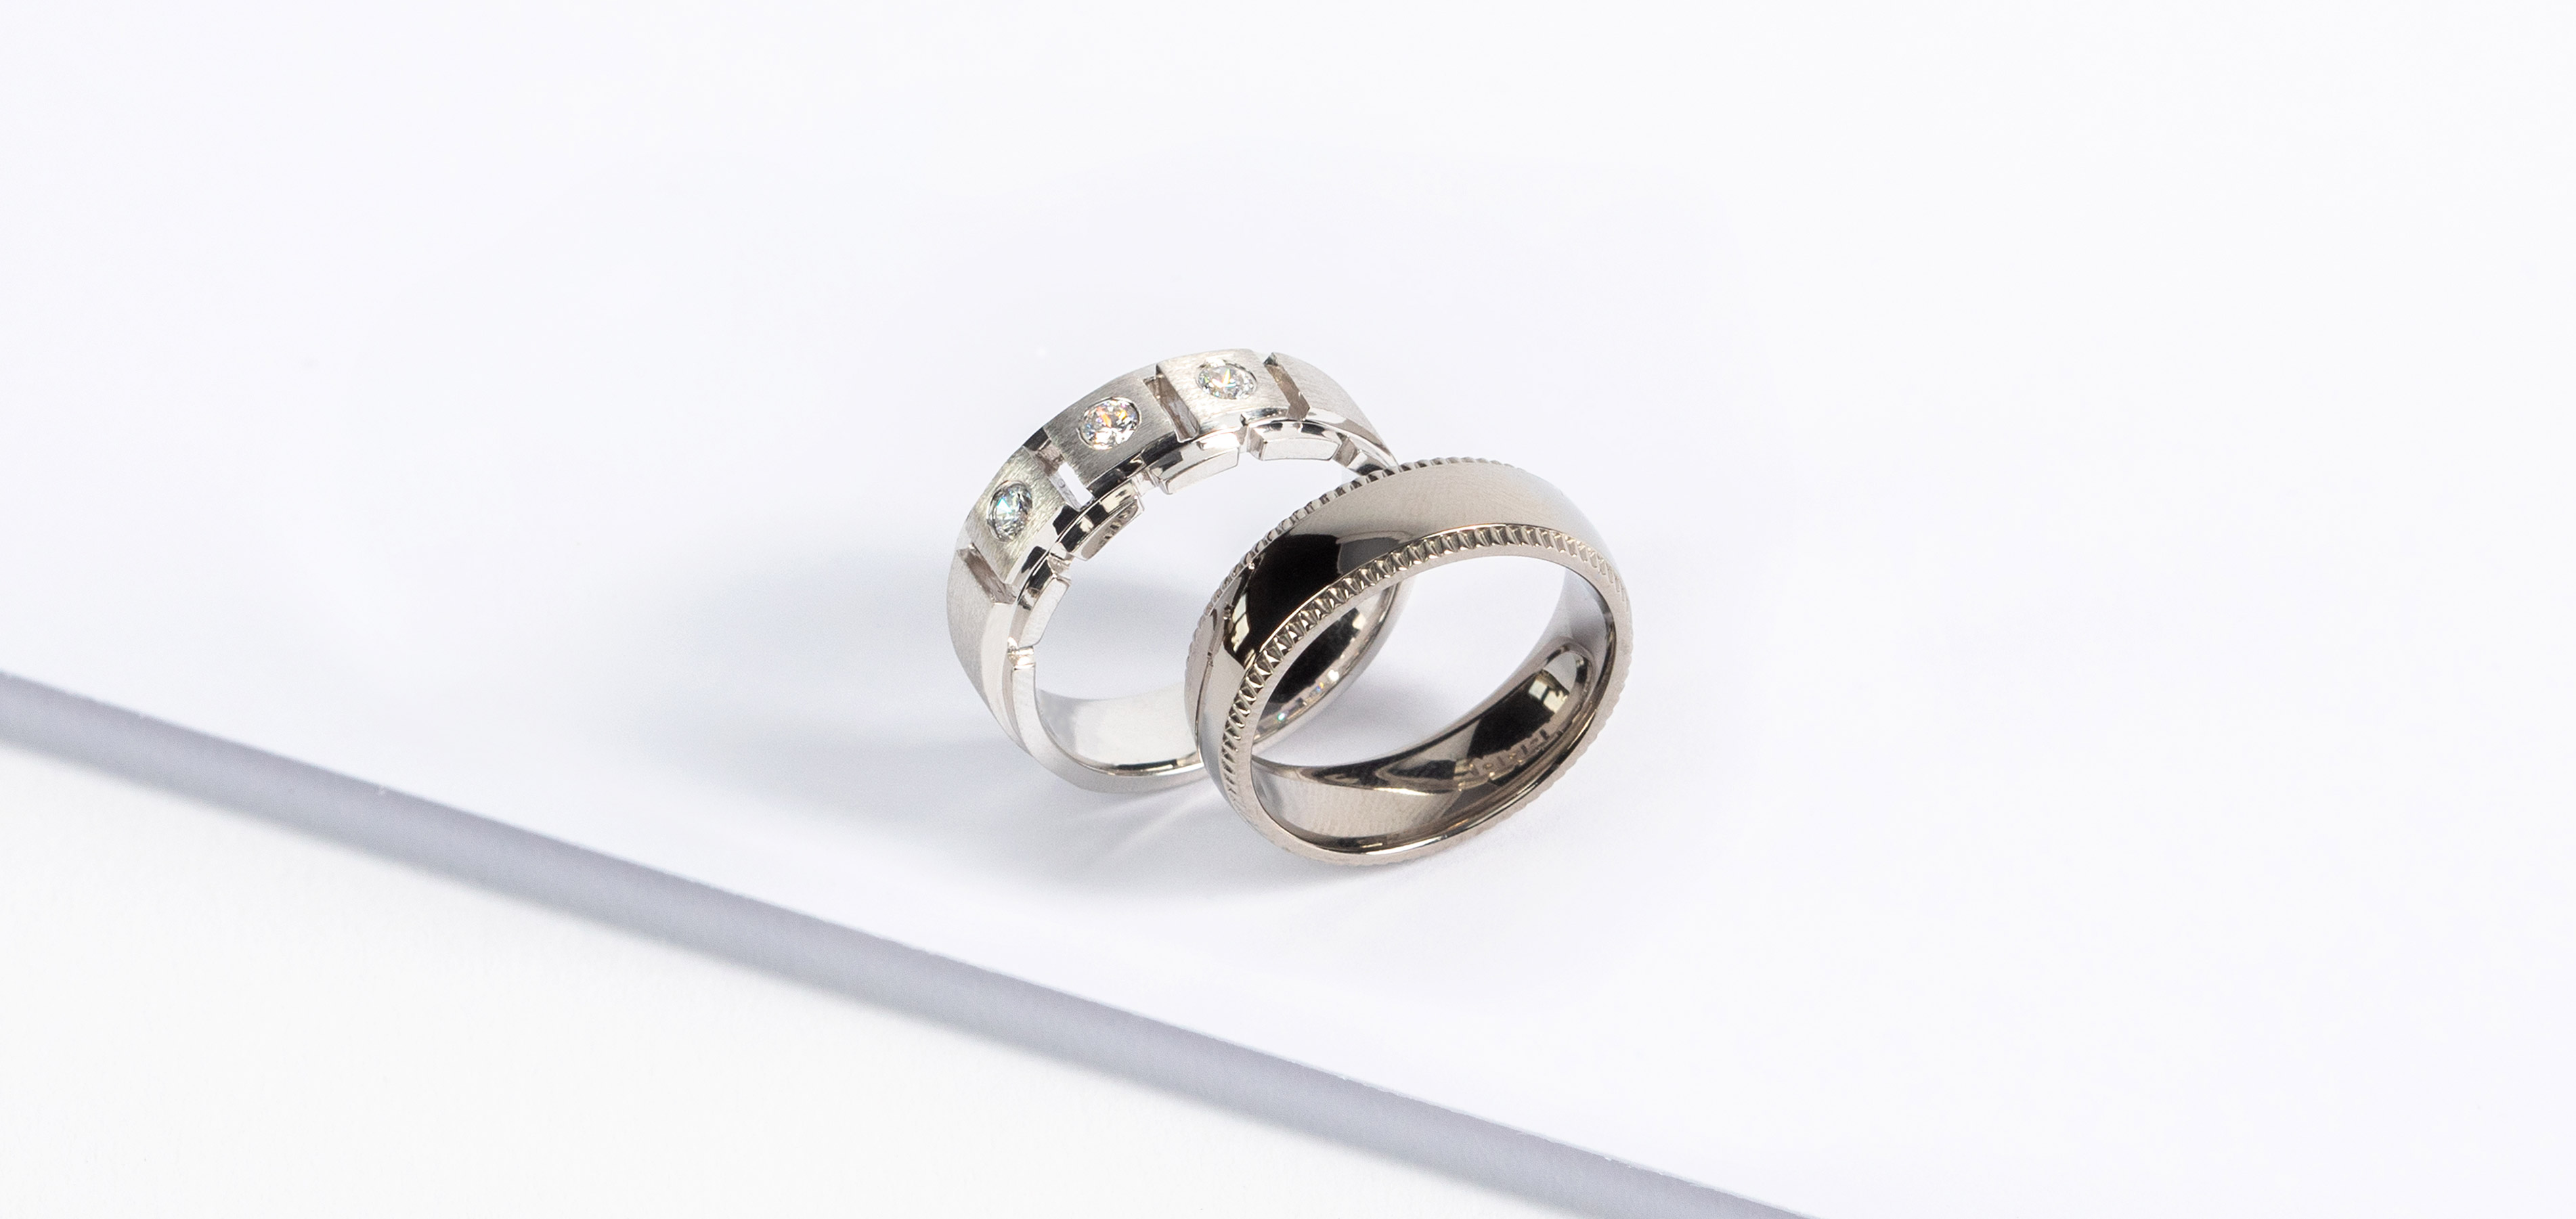 Everything You Need to Know About Men's Wedding Ring Sets